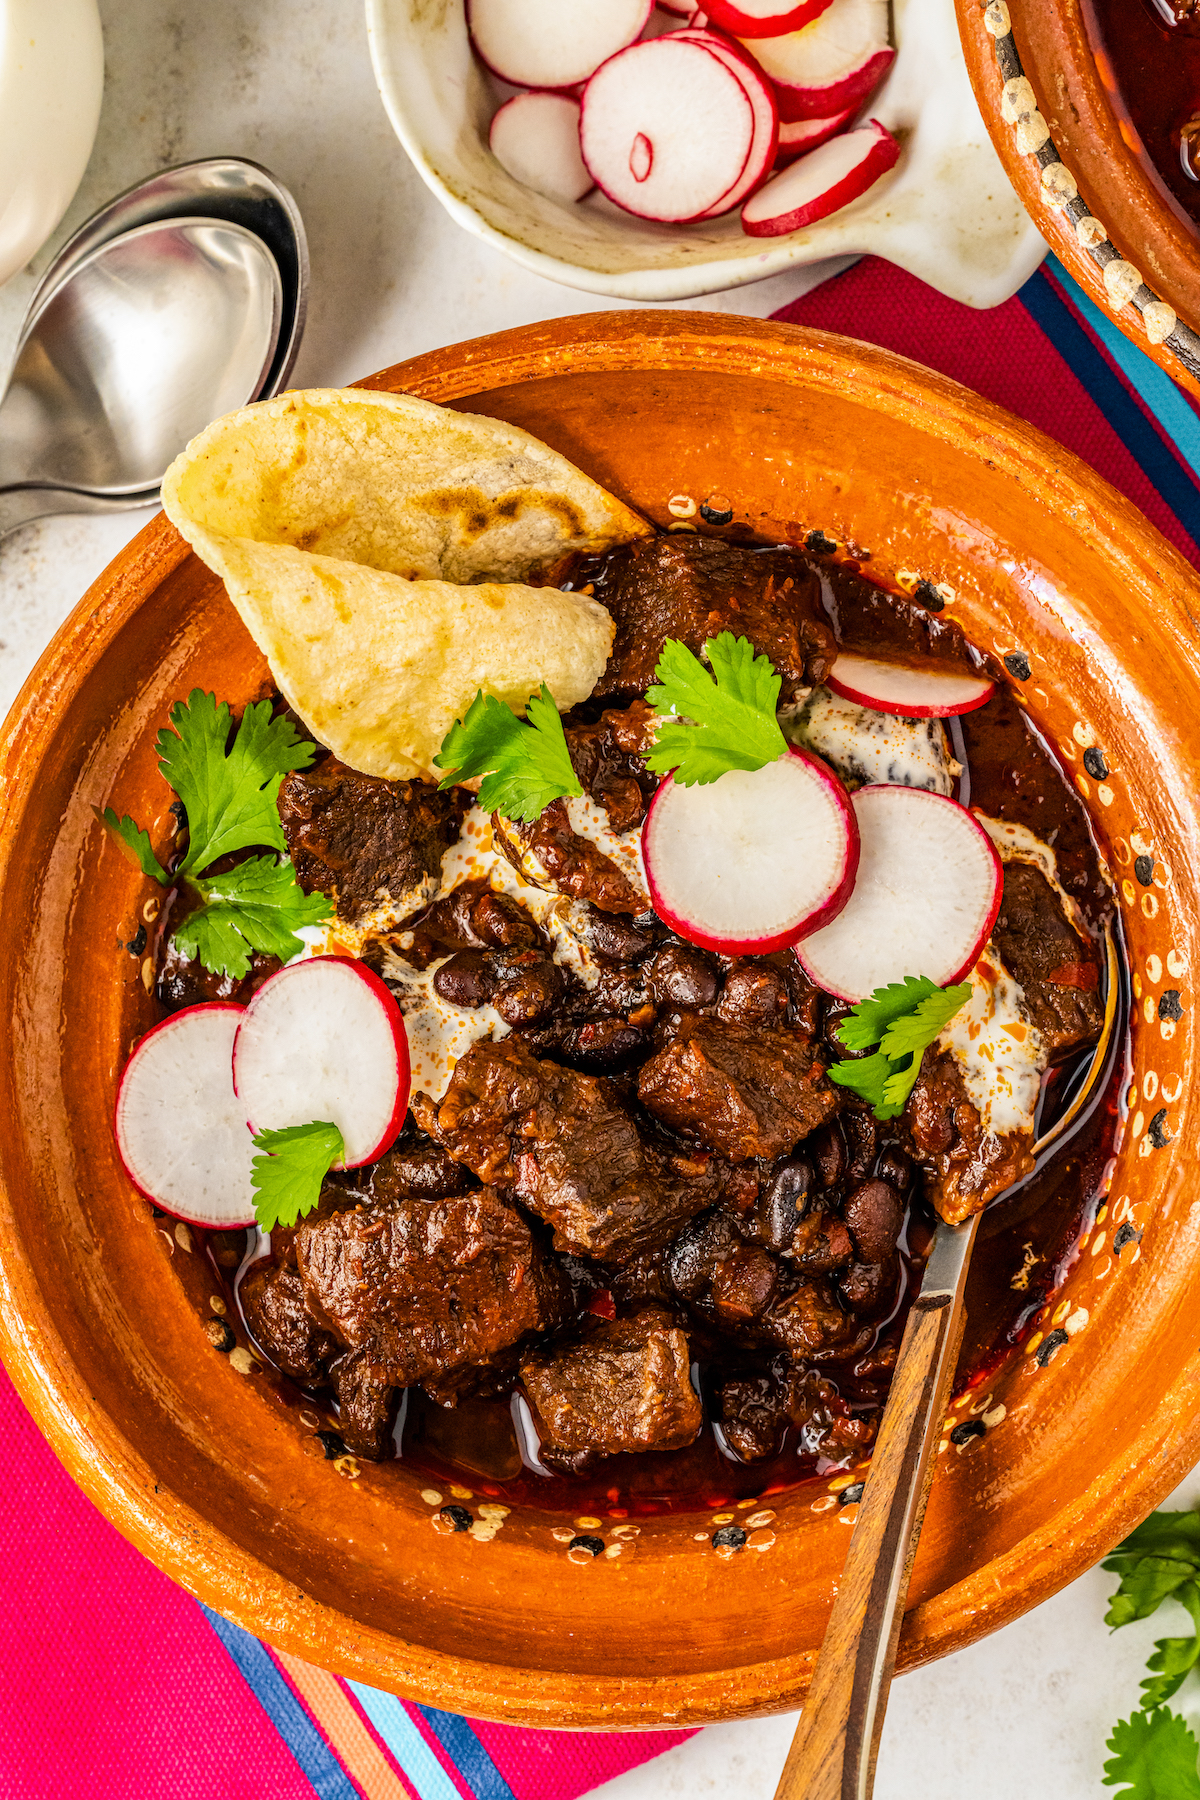 Overhead shot of homemade beef chili with a tortilla and radishes.